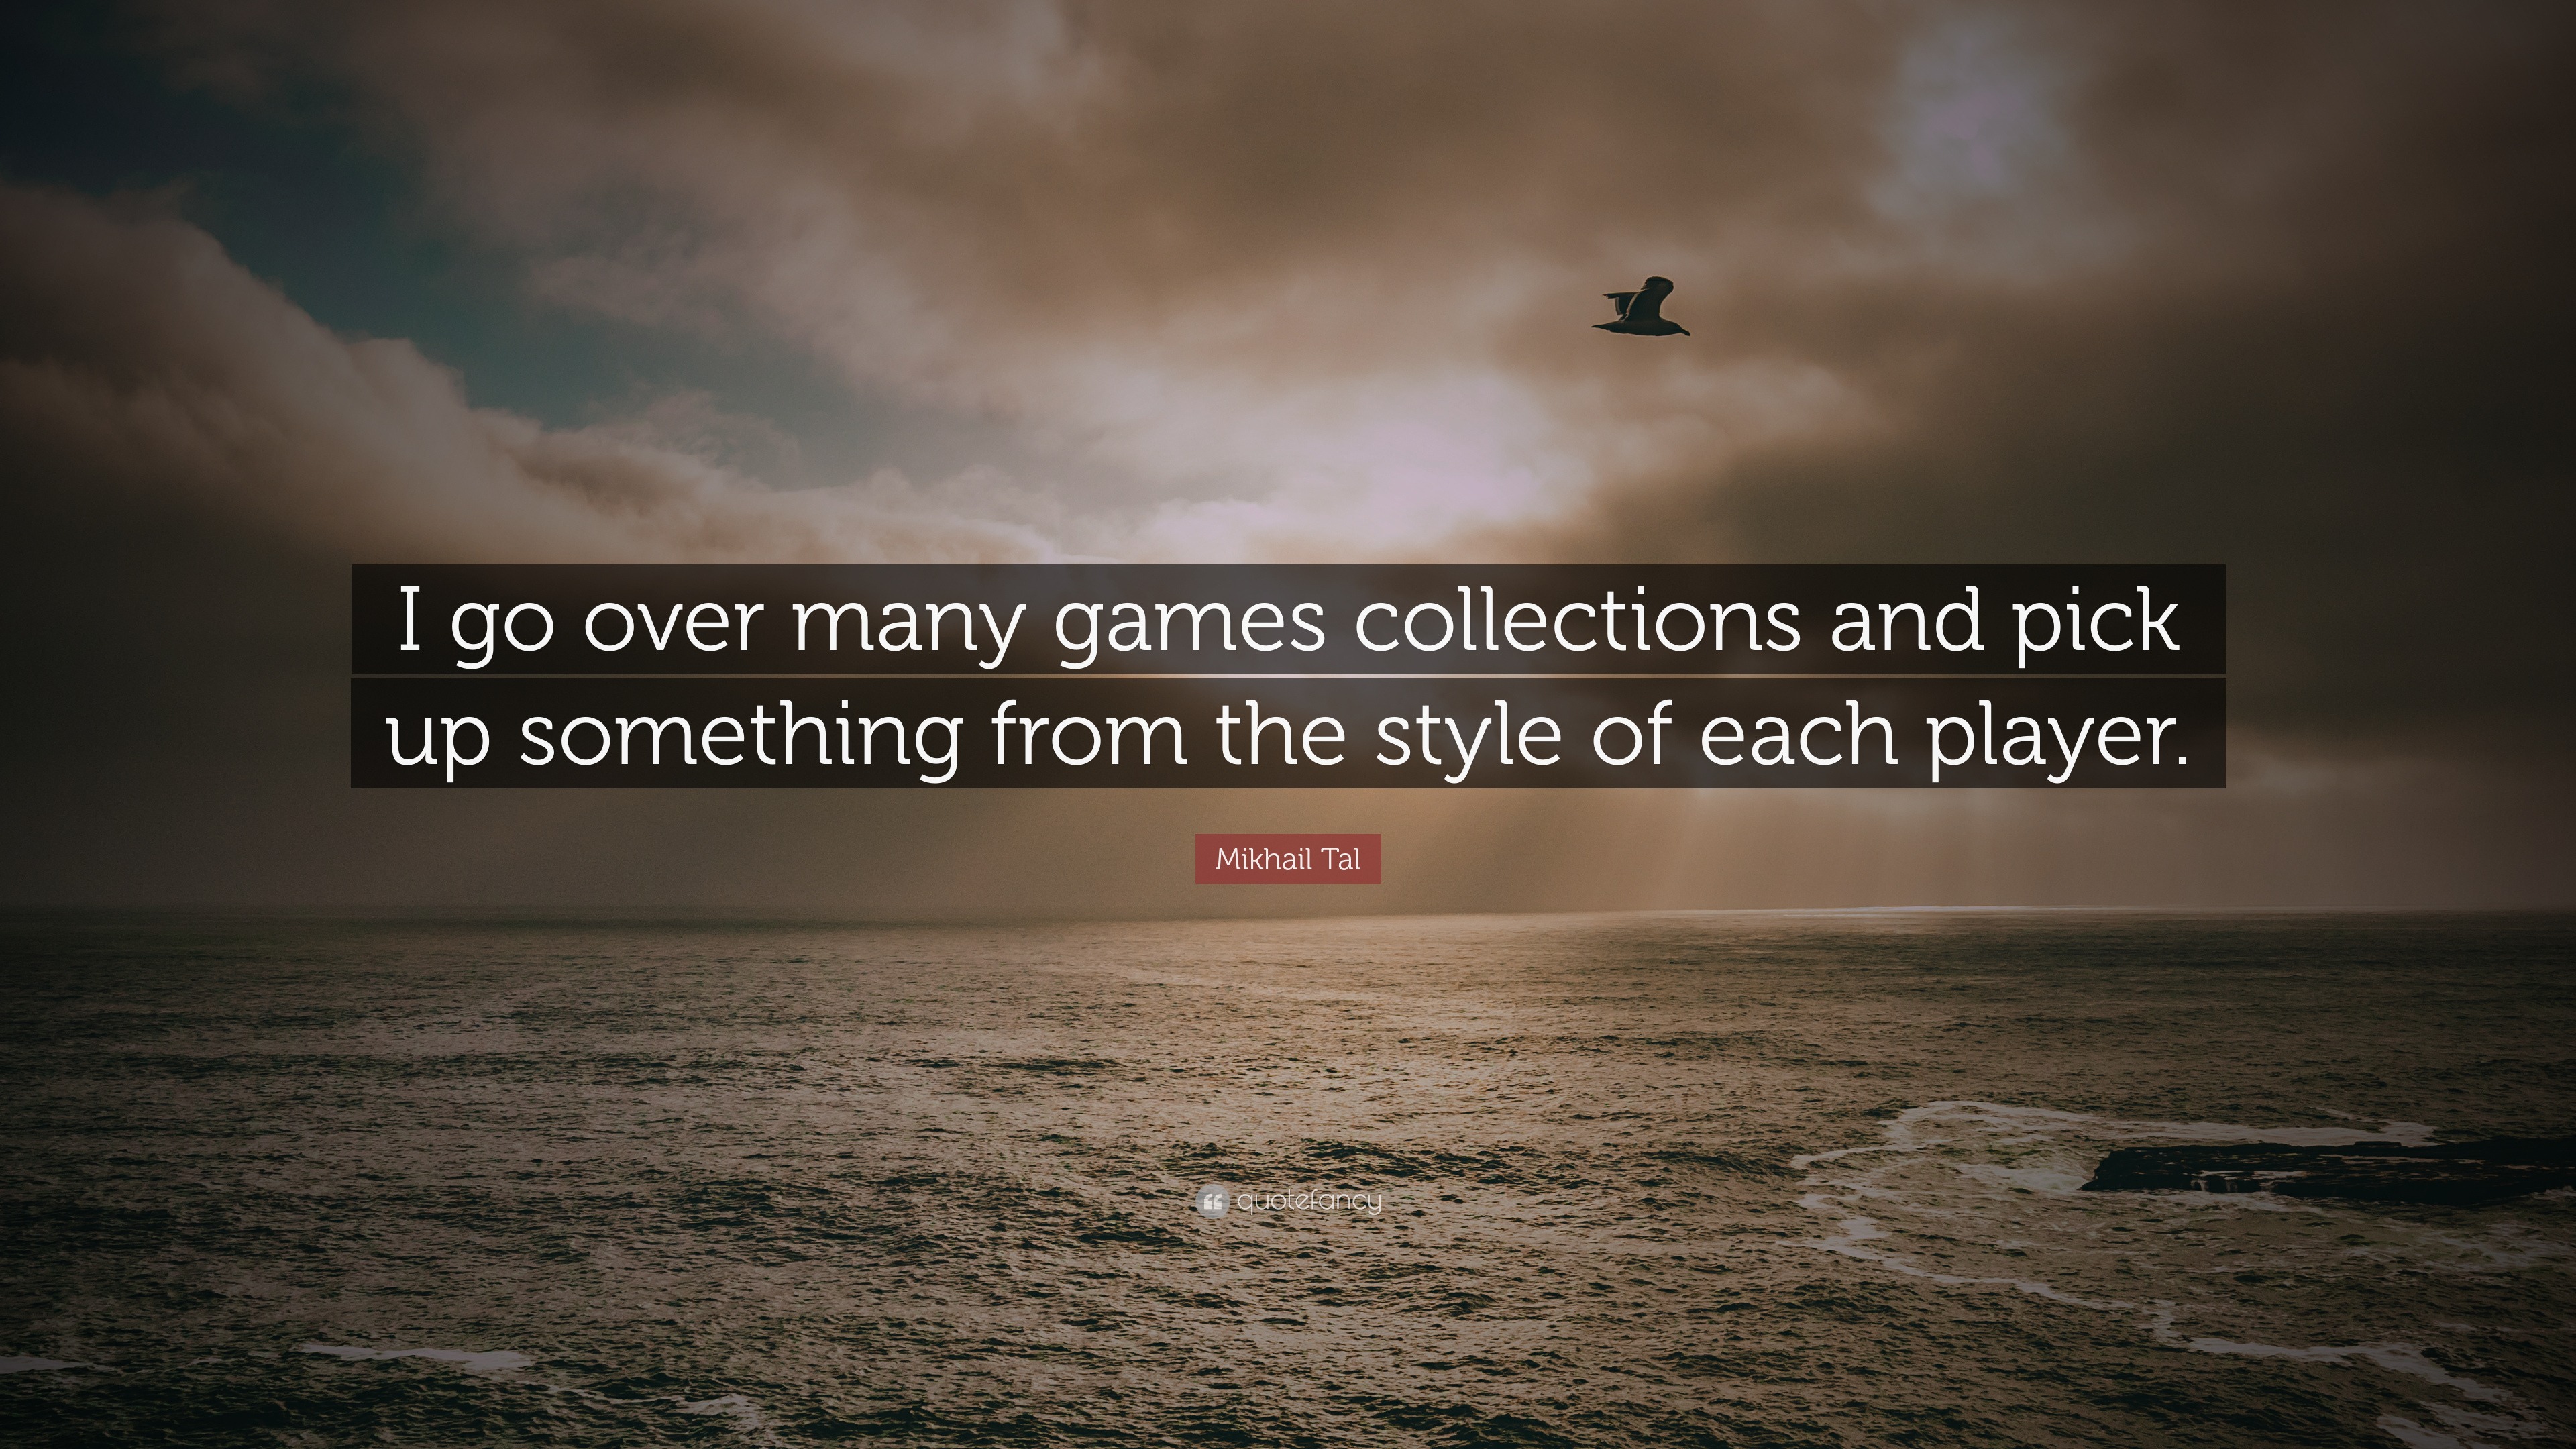 chess24.com on X: Undoubtedly one of the most popular chess players ever, Mikhail  Tal had some creative quotes like this one. What did Tal mean by taking  your opponent to a deep